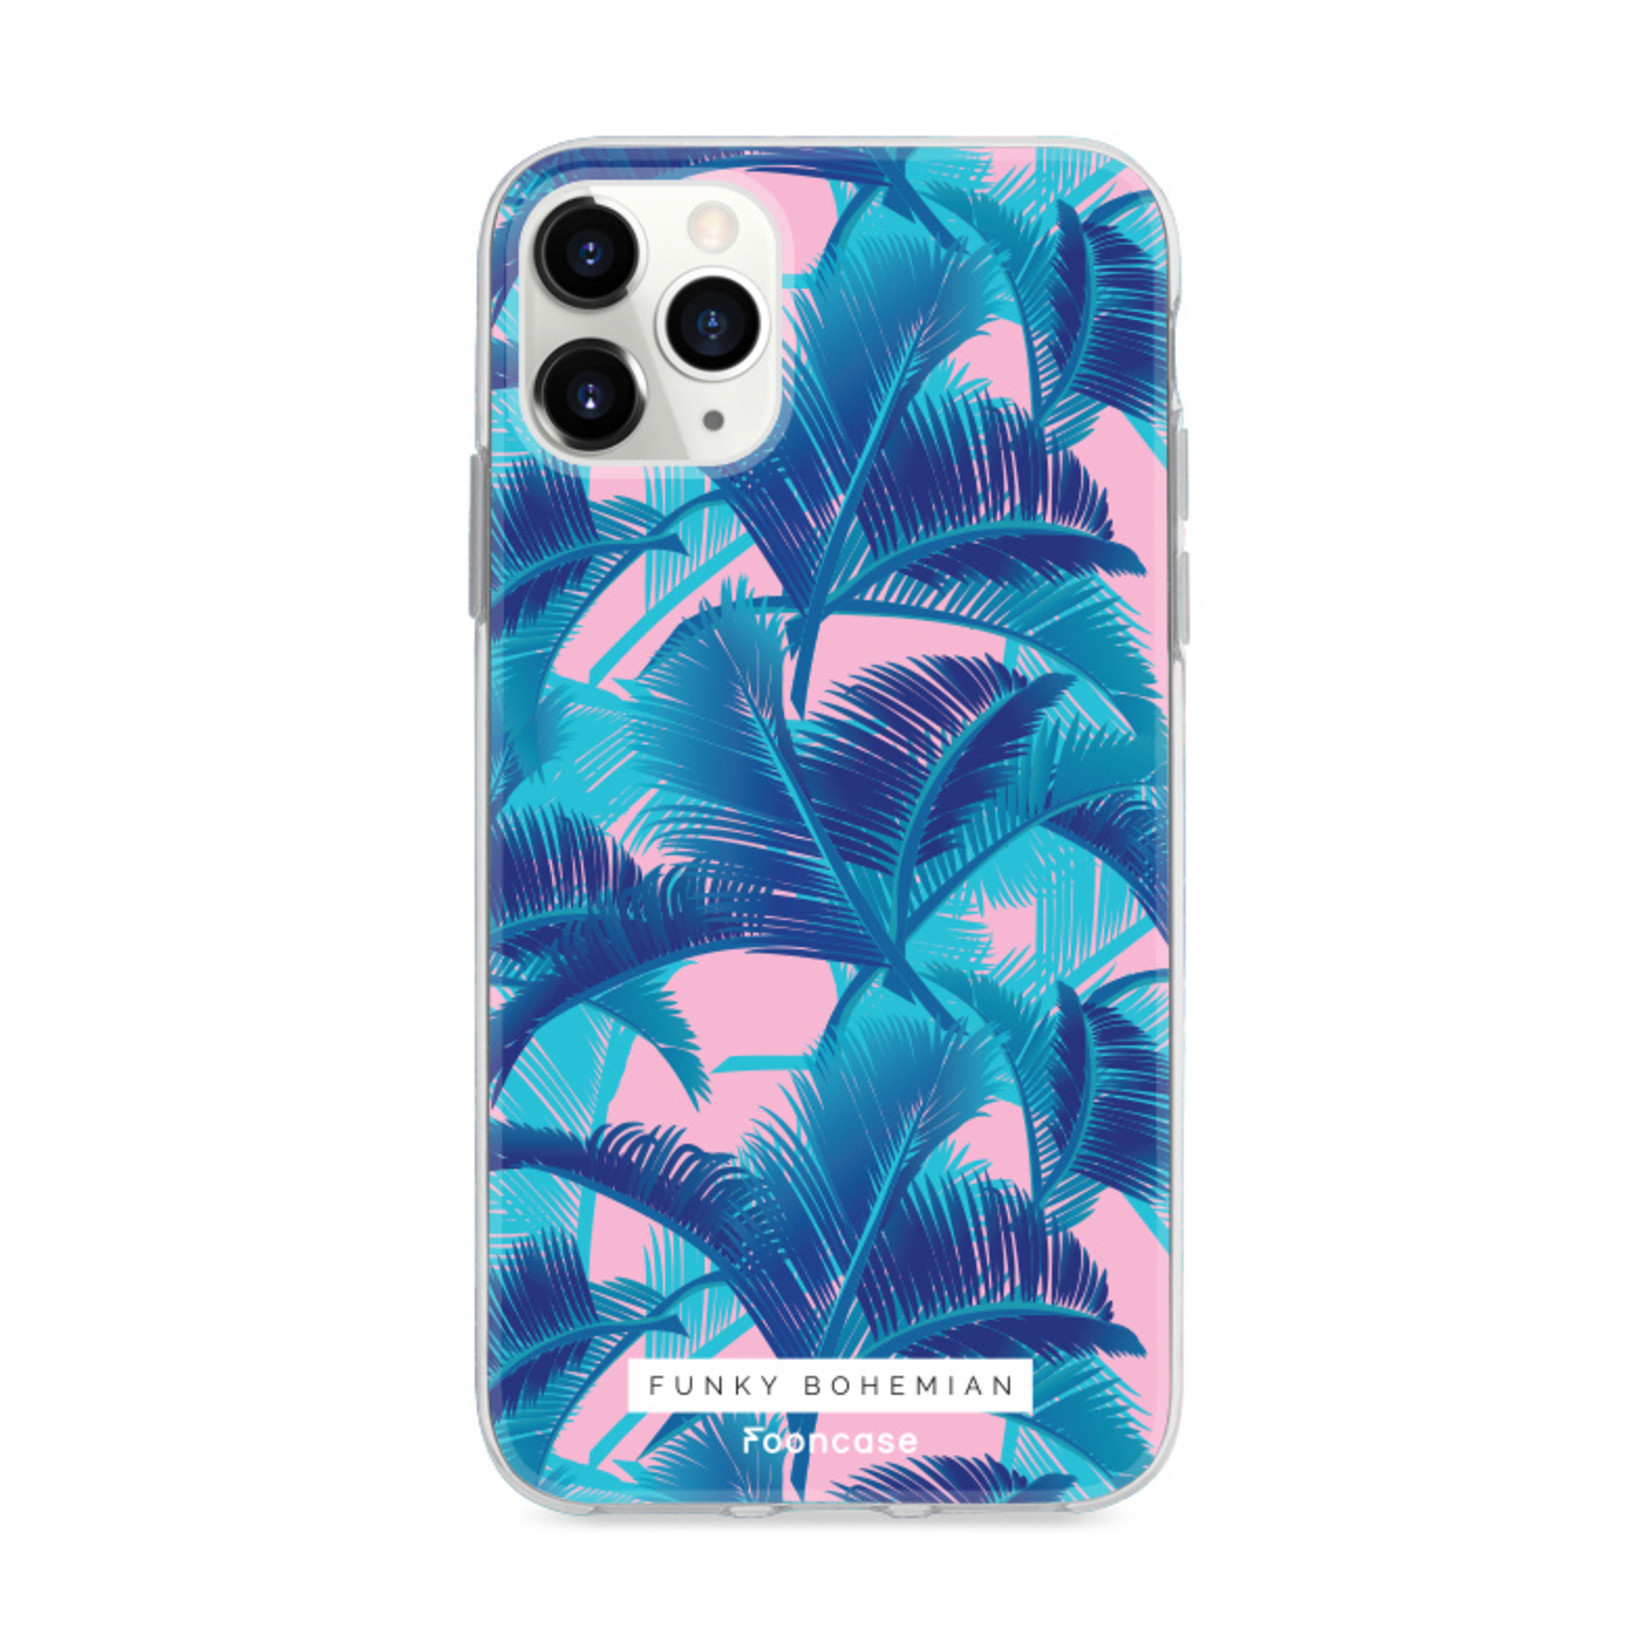 FOONCASE iPhone 11 Pro Max hoesje TPU Soft Case - Back Cover - Funky Bohemian / Blauw Roze Bladeren